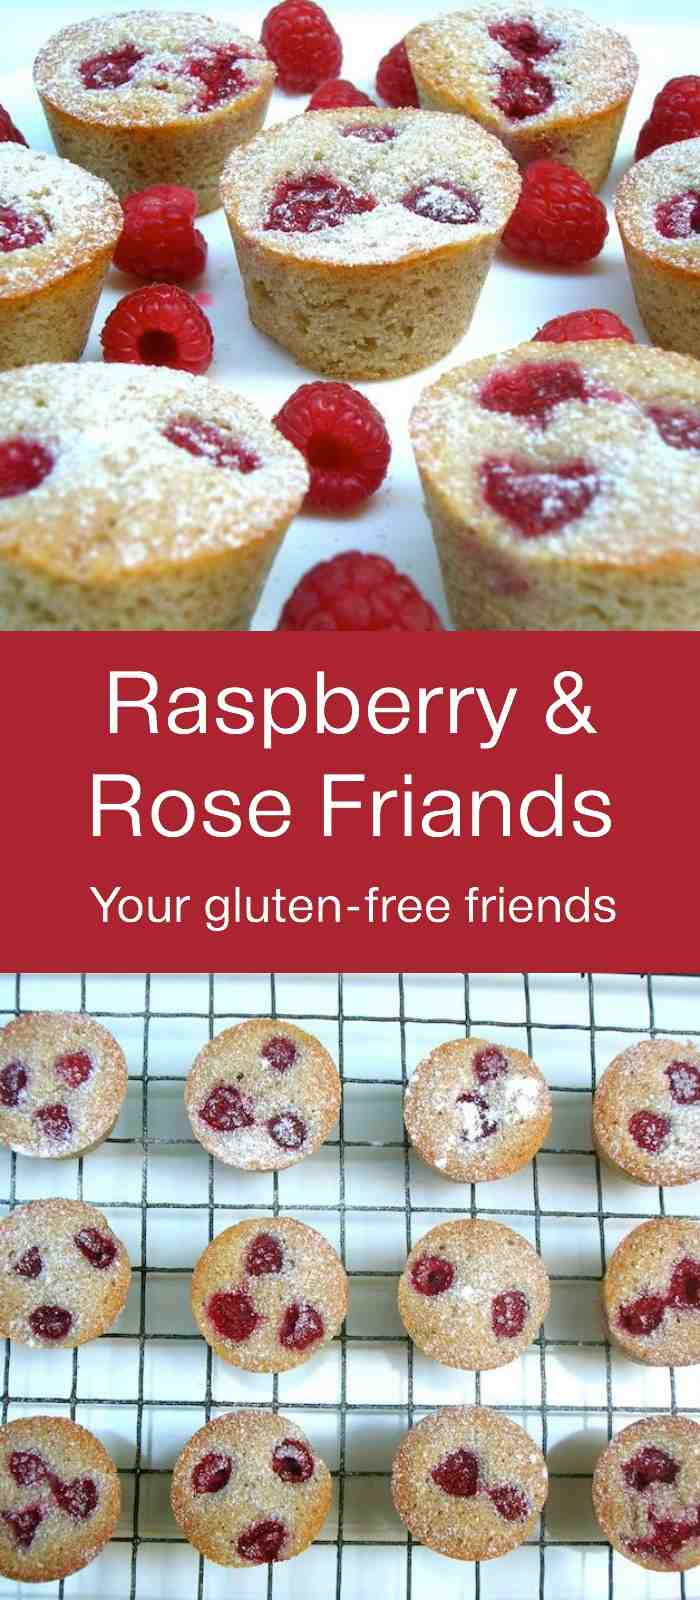 Raspberry Rose Friands - delicious little cakes that are gluten-free. Easy to make too.